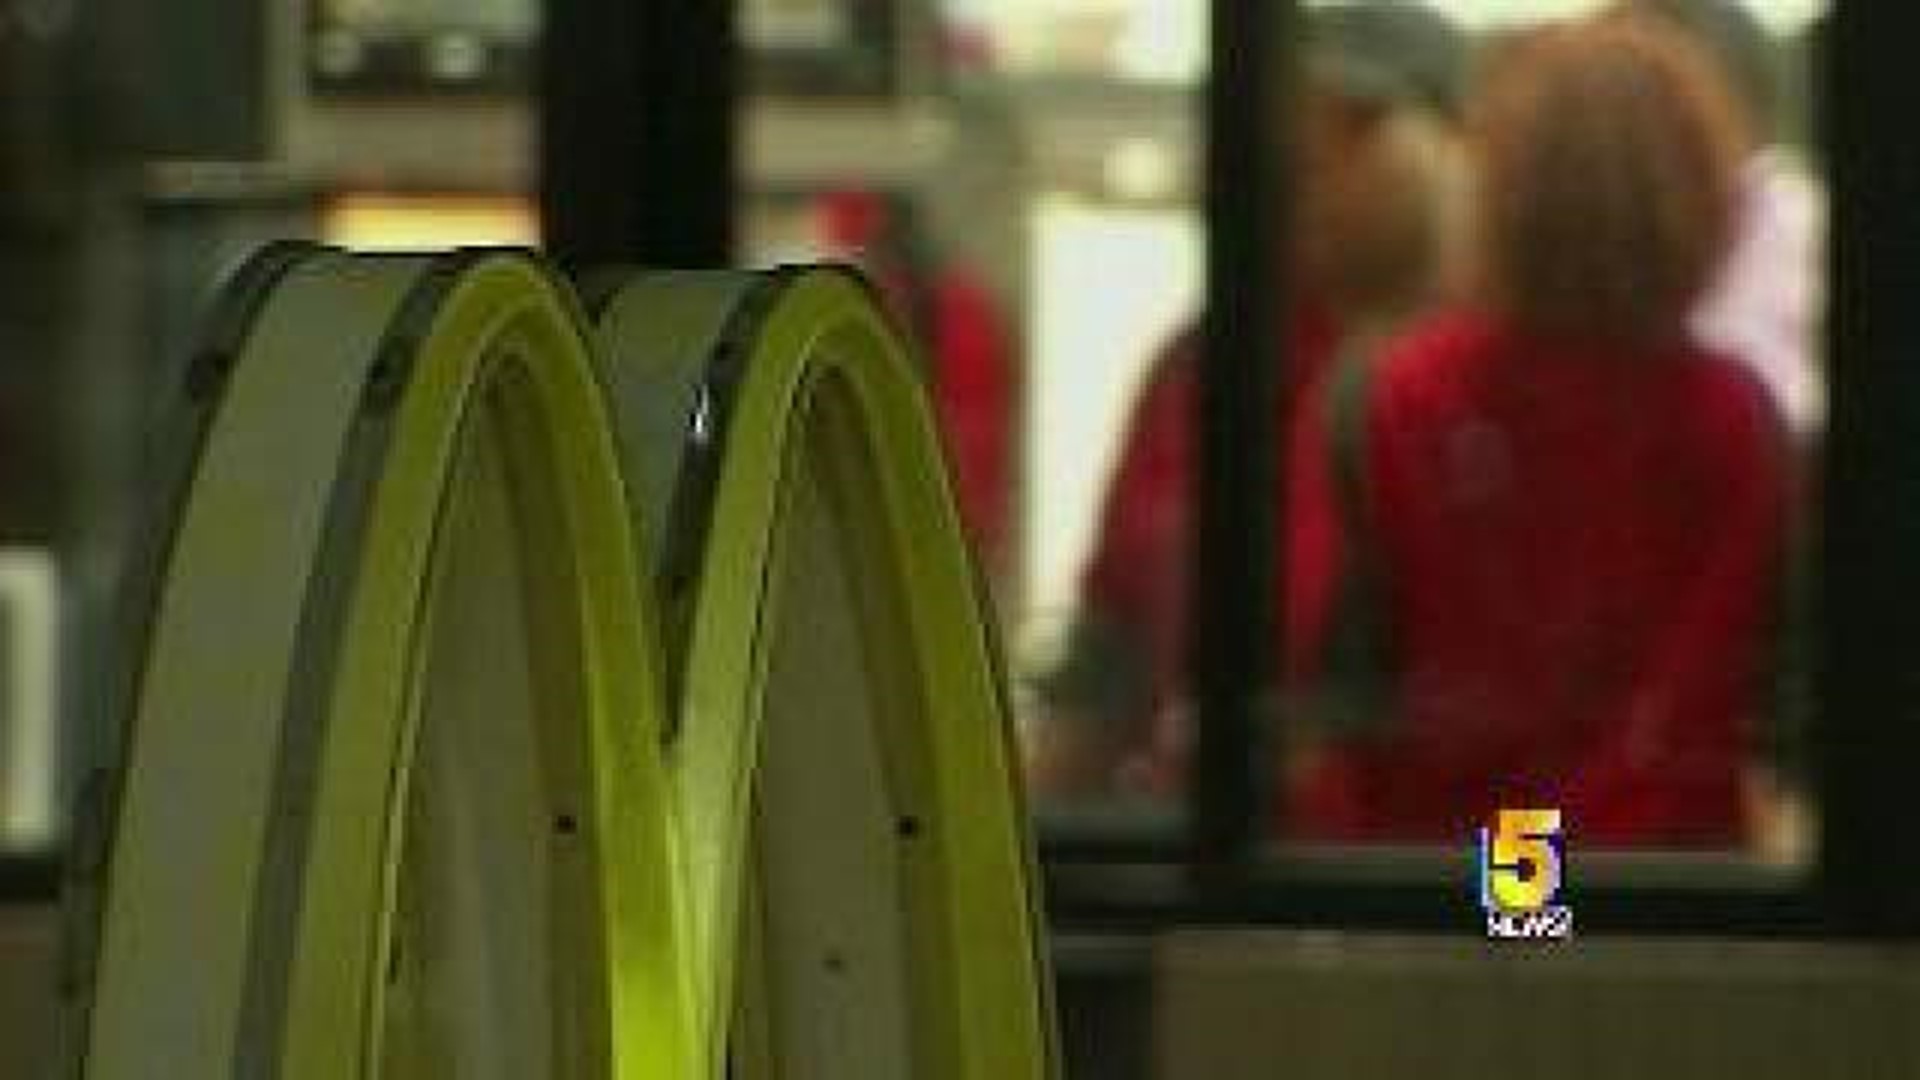 McDonald's Worker Arrested for Heroin Happy Meals